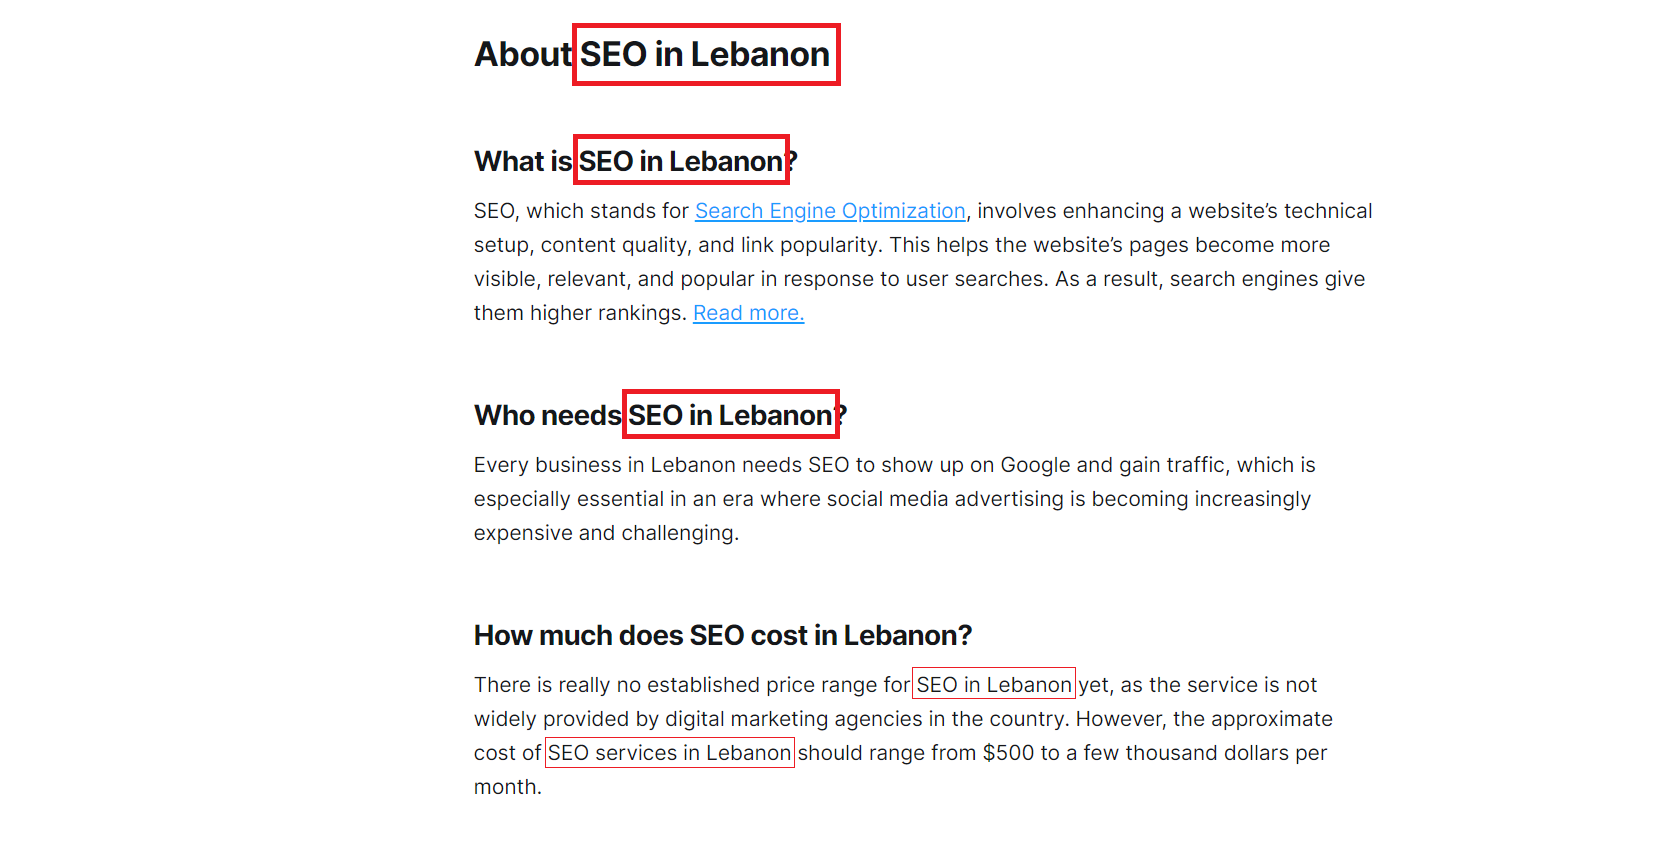 Optimize your website's keywords to improve SEO in Lebanon